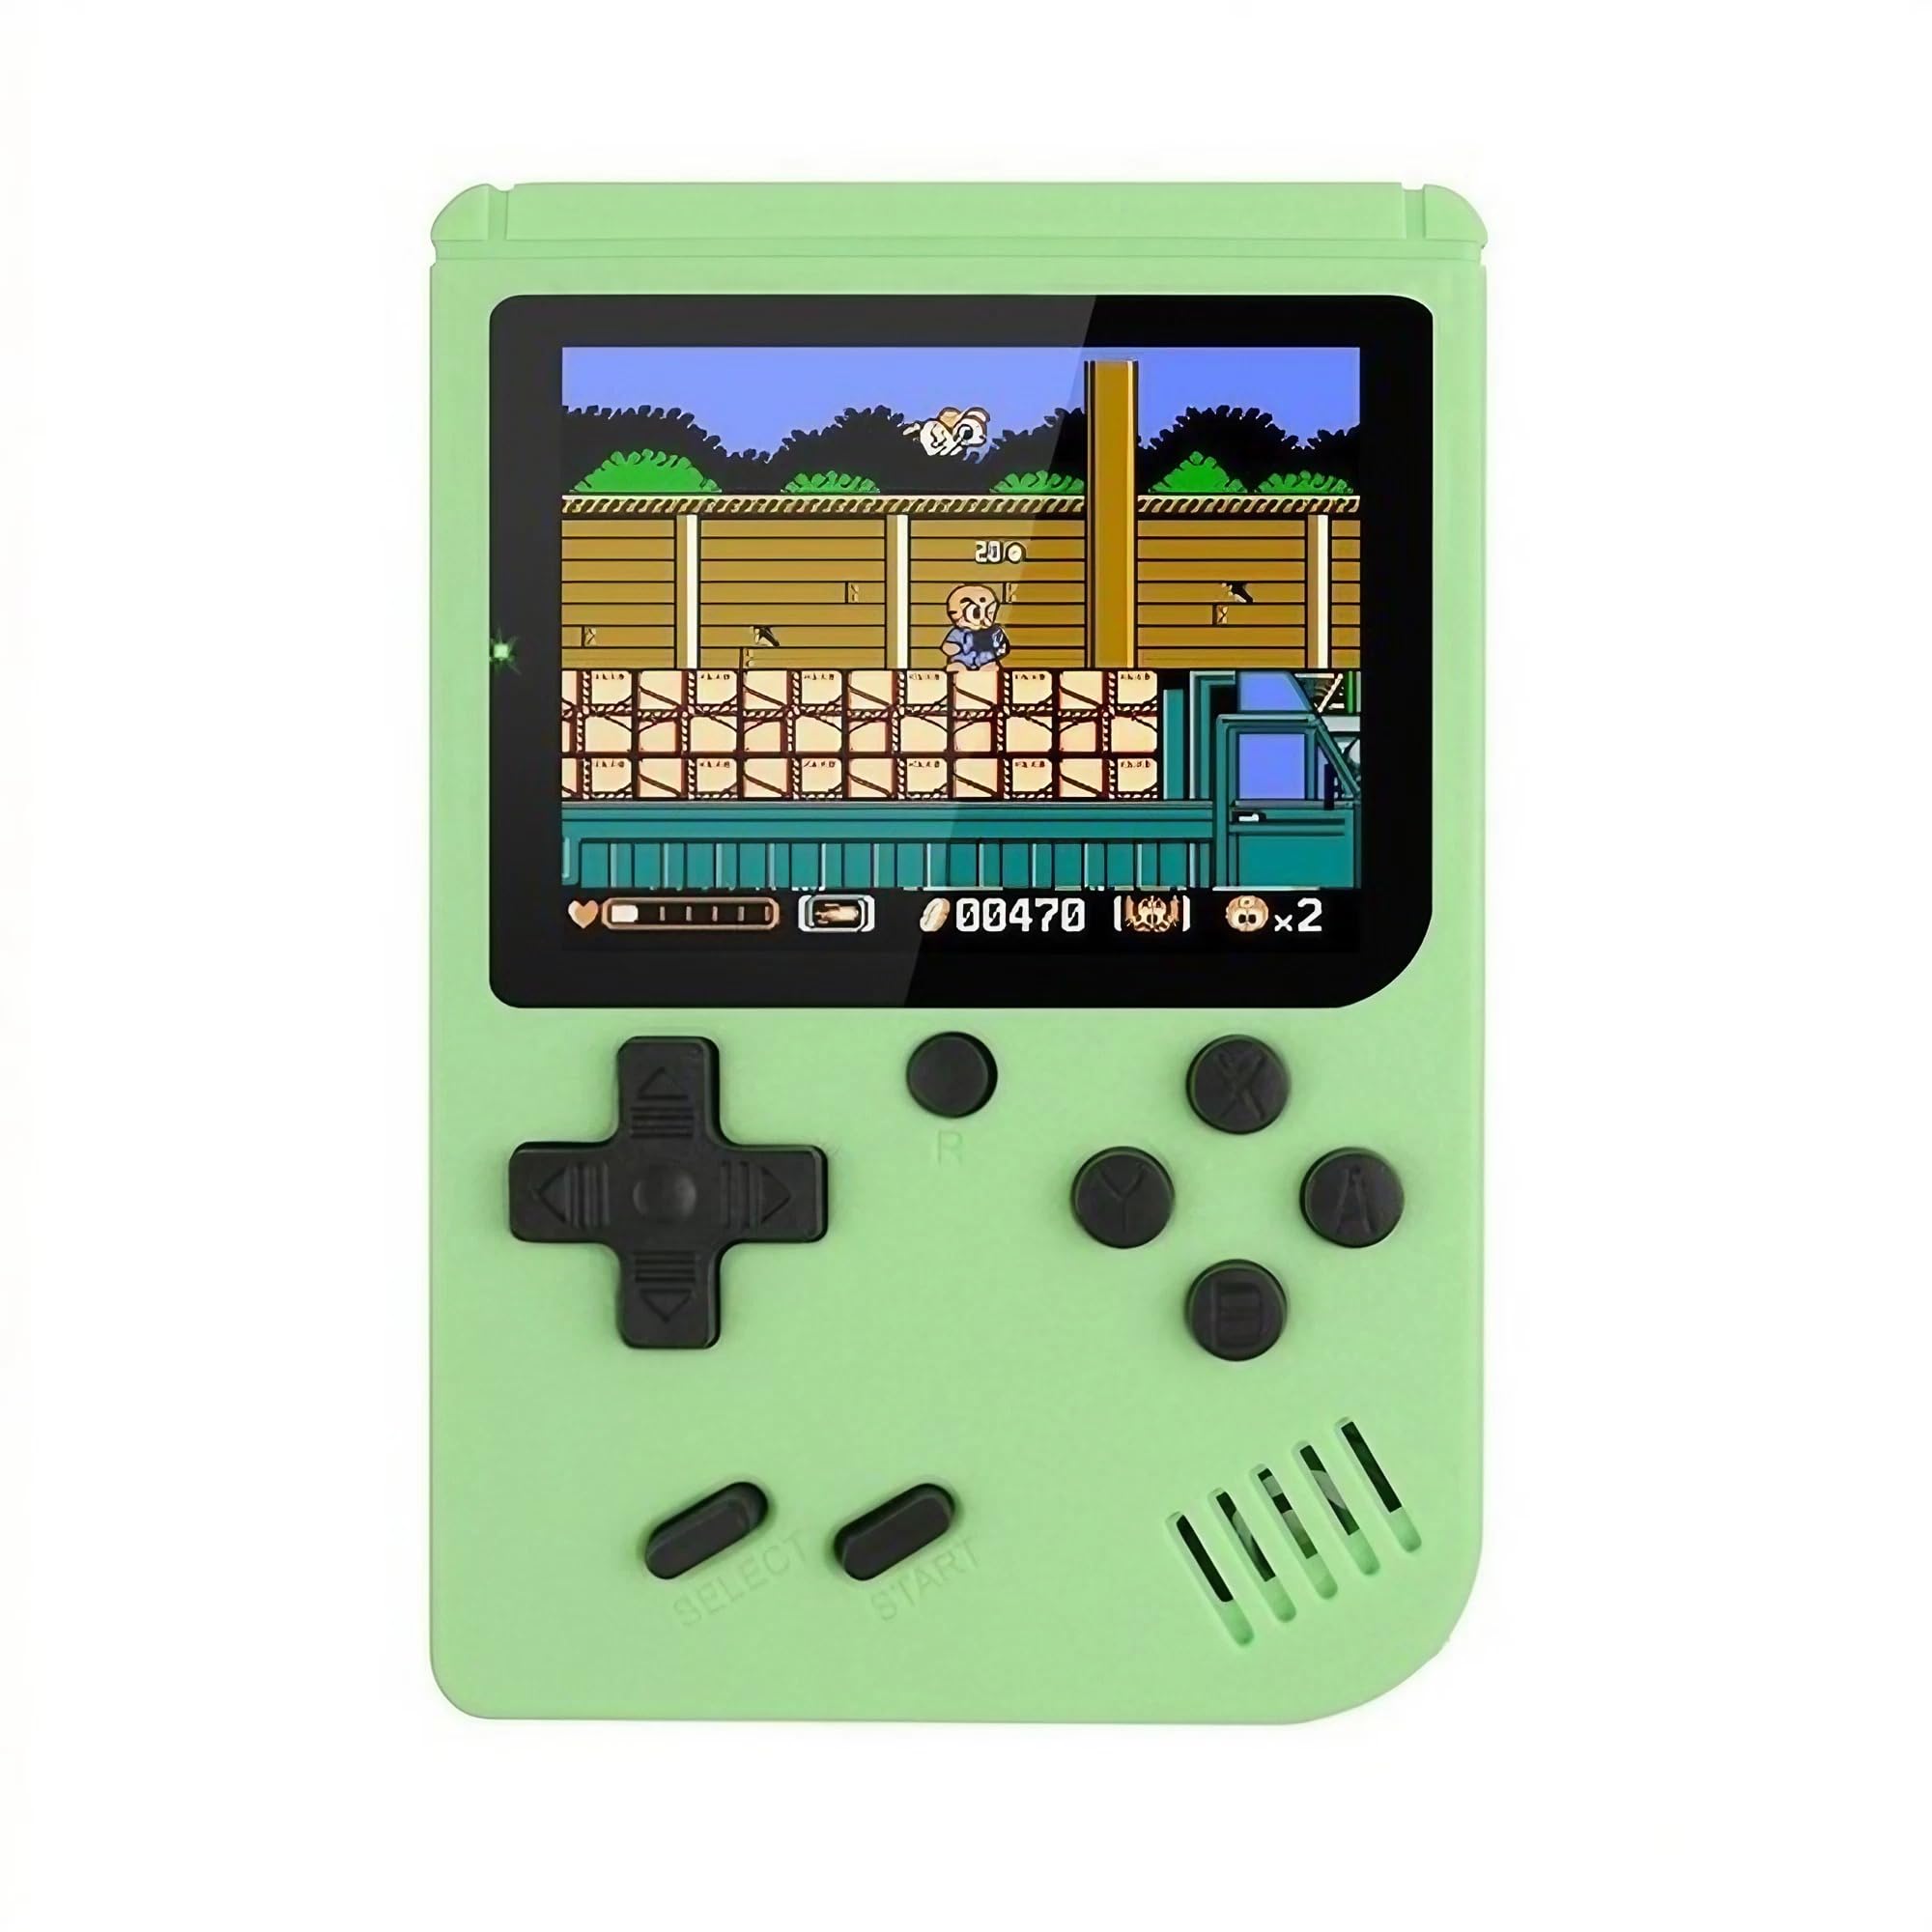 ZOMTOP Retro Portable Mini Handheld Video Game Console 8 Bit 3.0 Inch Color LCD Kids Color Game Player Built in 500 Games Support TV Connection(Green)